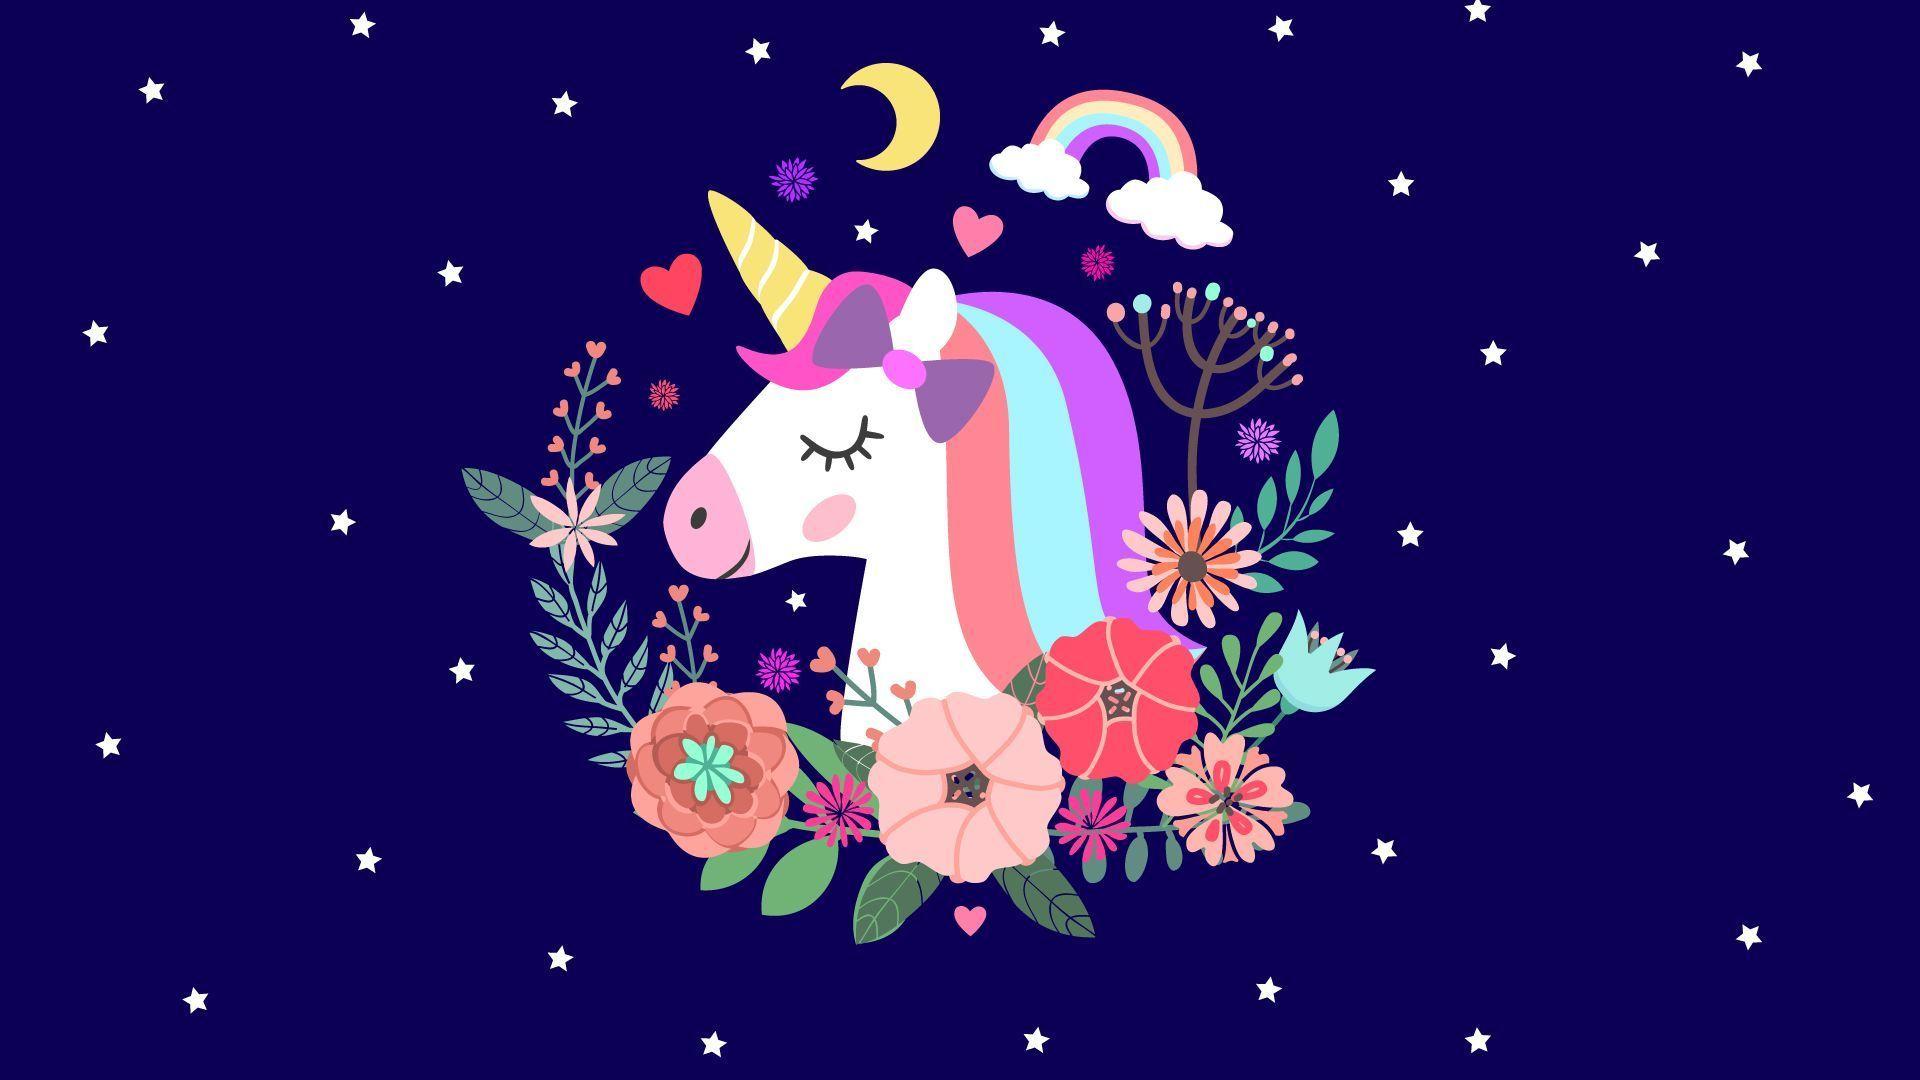 Unicorn Pc Wallpapers Top Free Unicorn Pc Backgrounds Wallpaperaccess When you boot your computer, there is an initial screen that comes up, in they add glamor to your computer and make it look aesthetically appealing and highly presentable. unicorn pc wallpapers top free